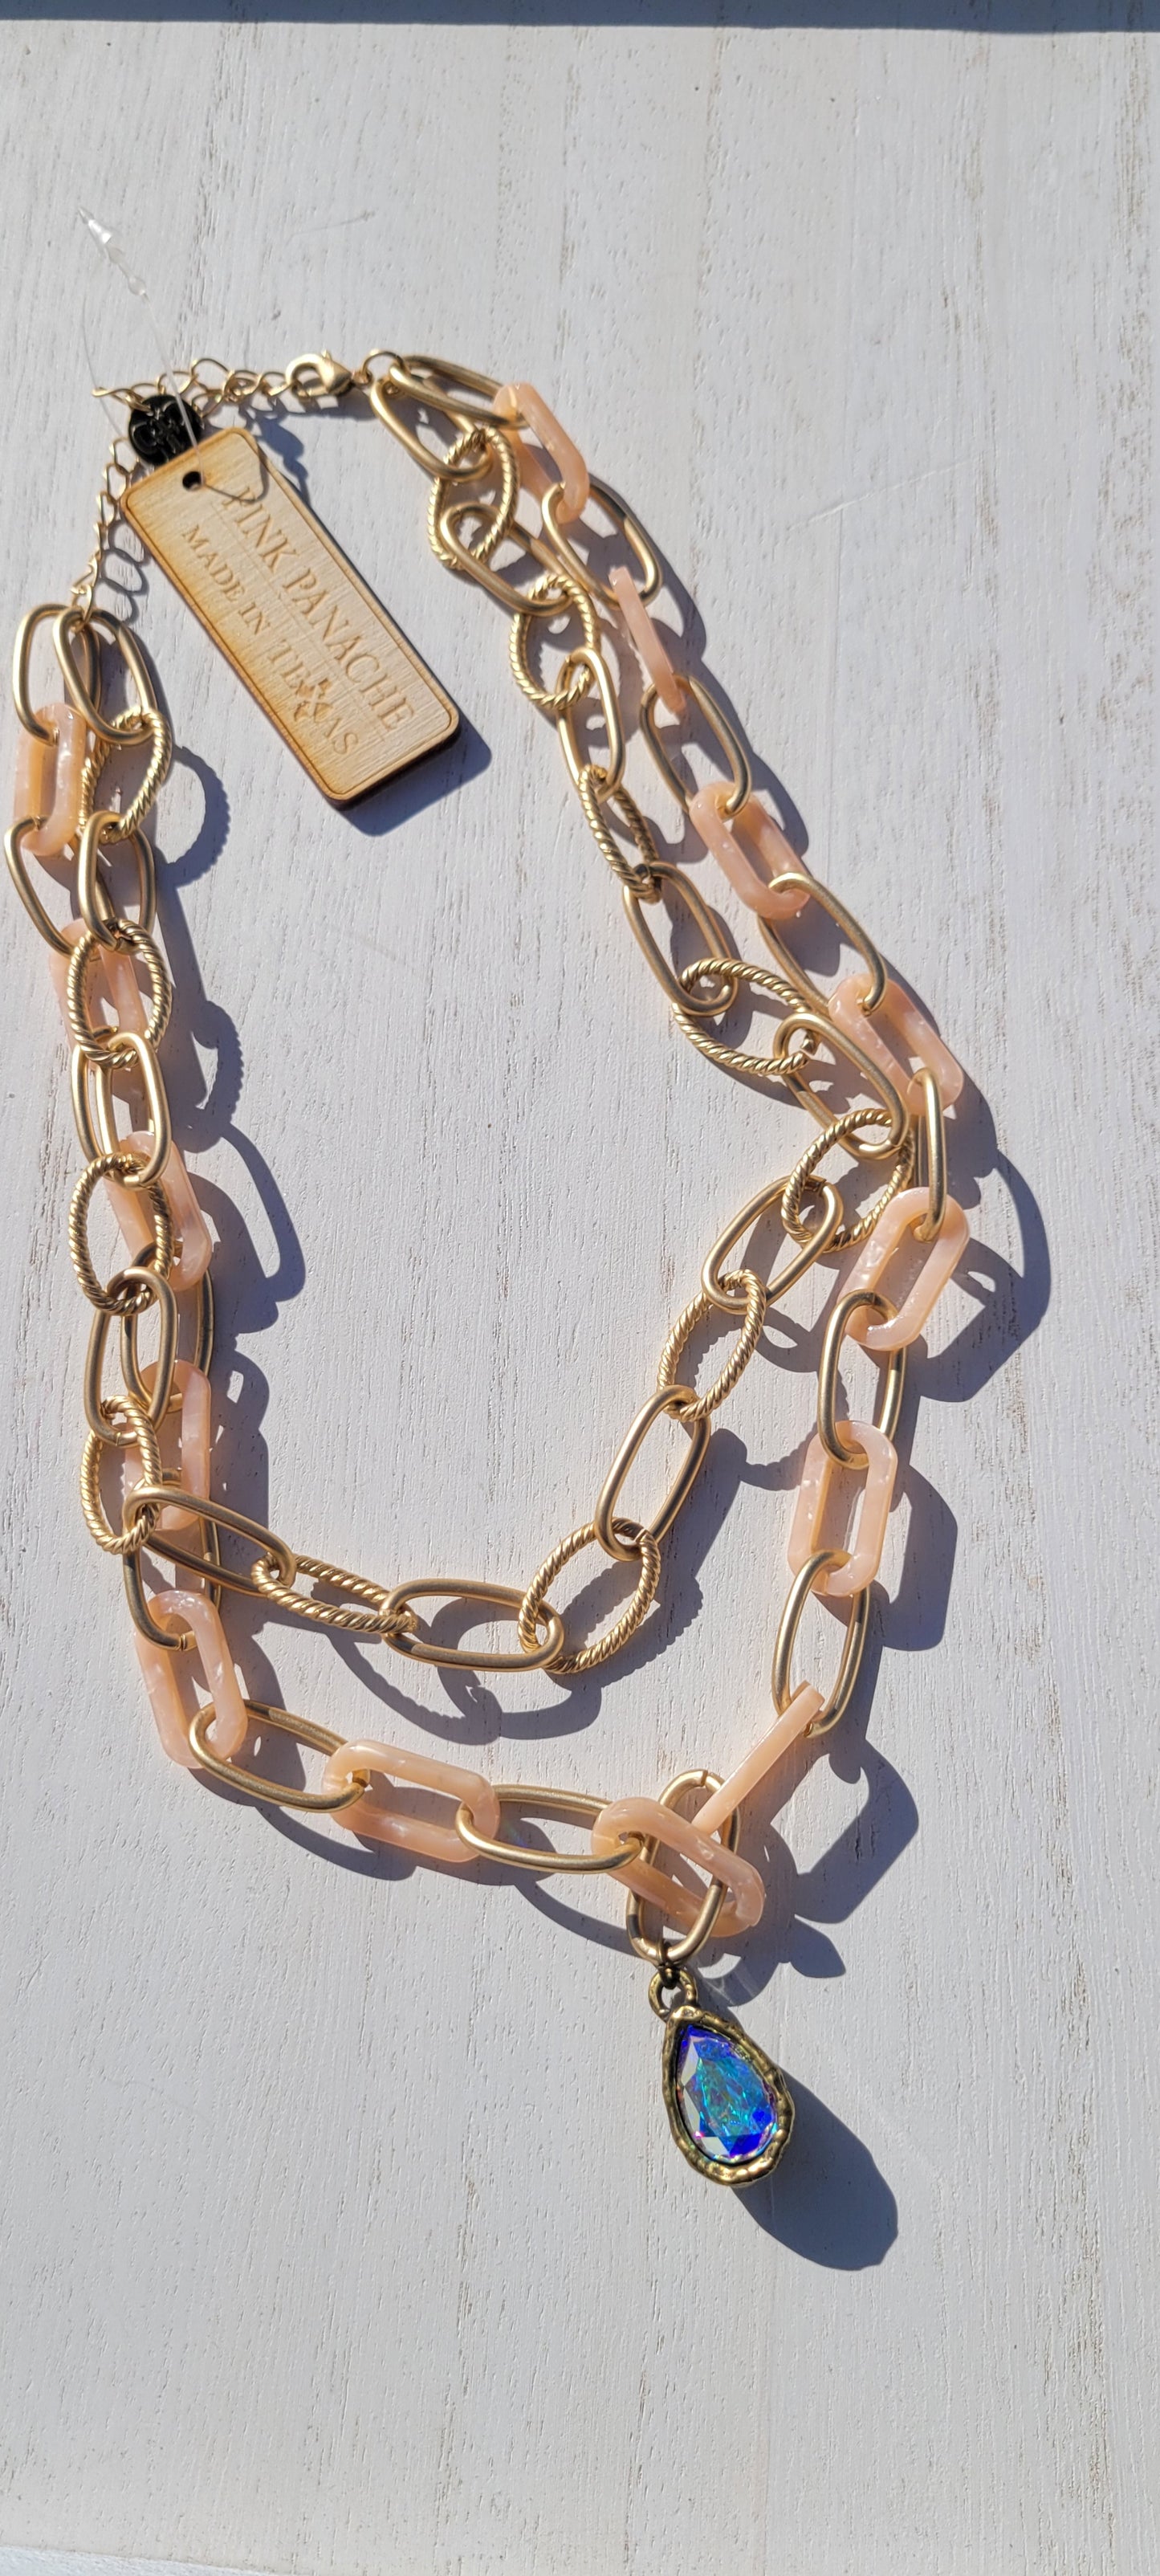 Pink Panache necklace Color: Pink acetate and gold link chain double strand necklace with small bronze/AB pear crystal drop Limited supply!